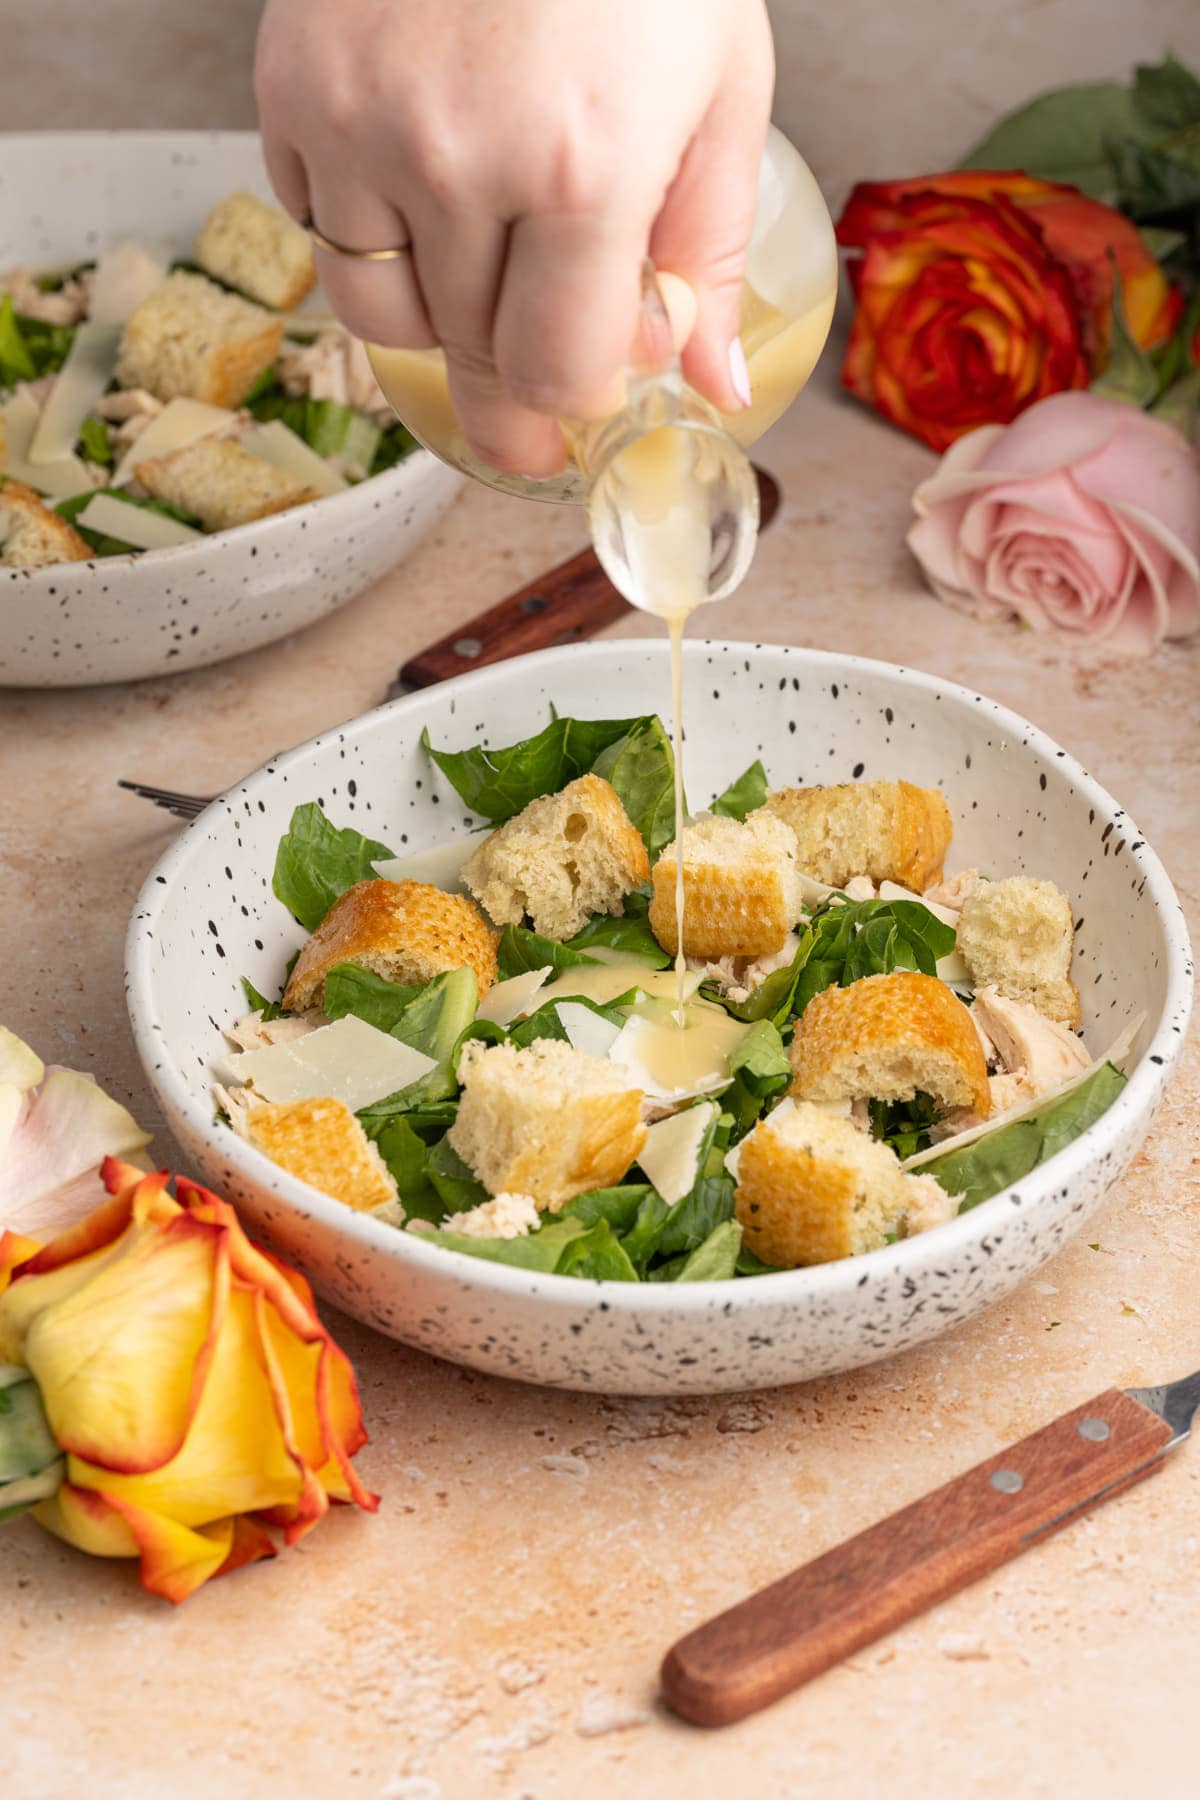 Dressing an individual portion of Caesar salad with homemade dressing